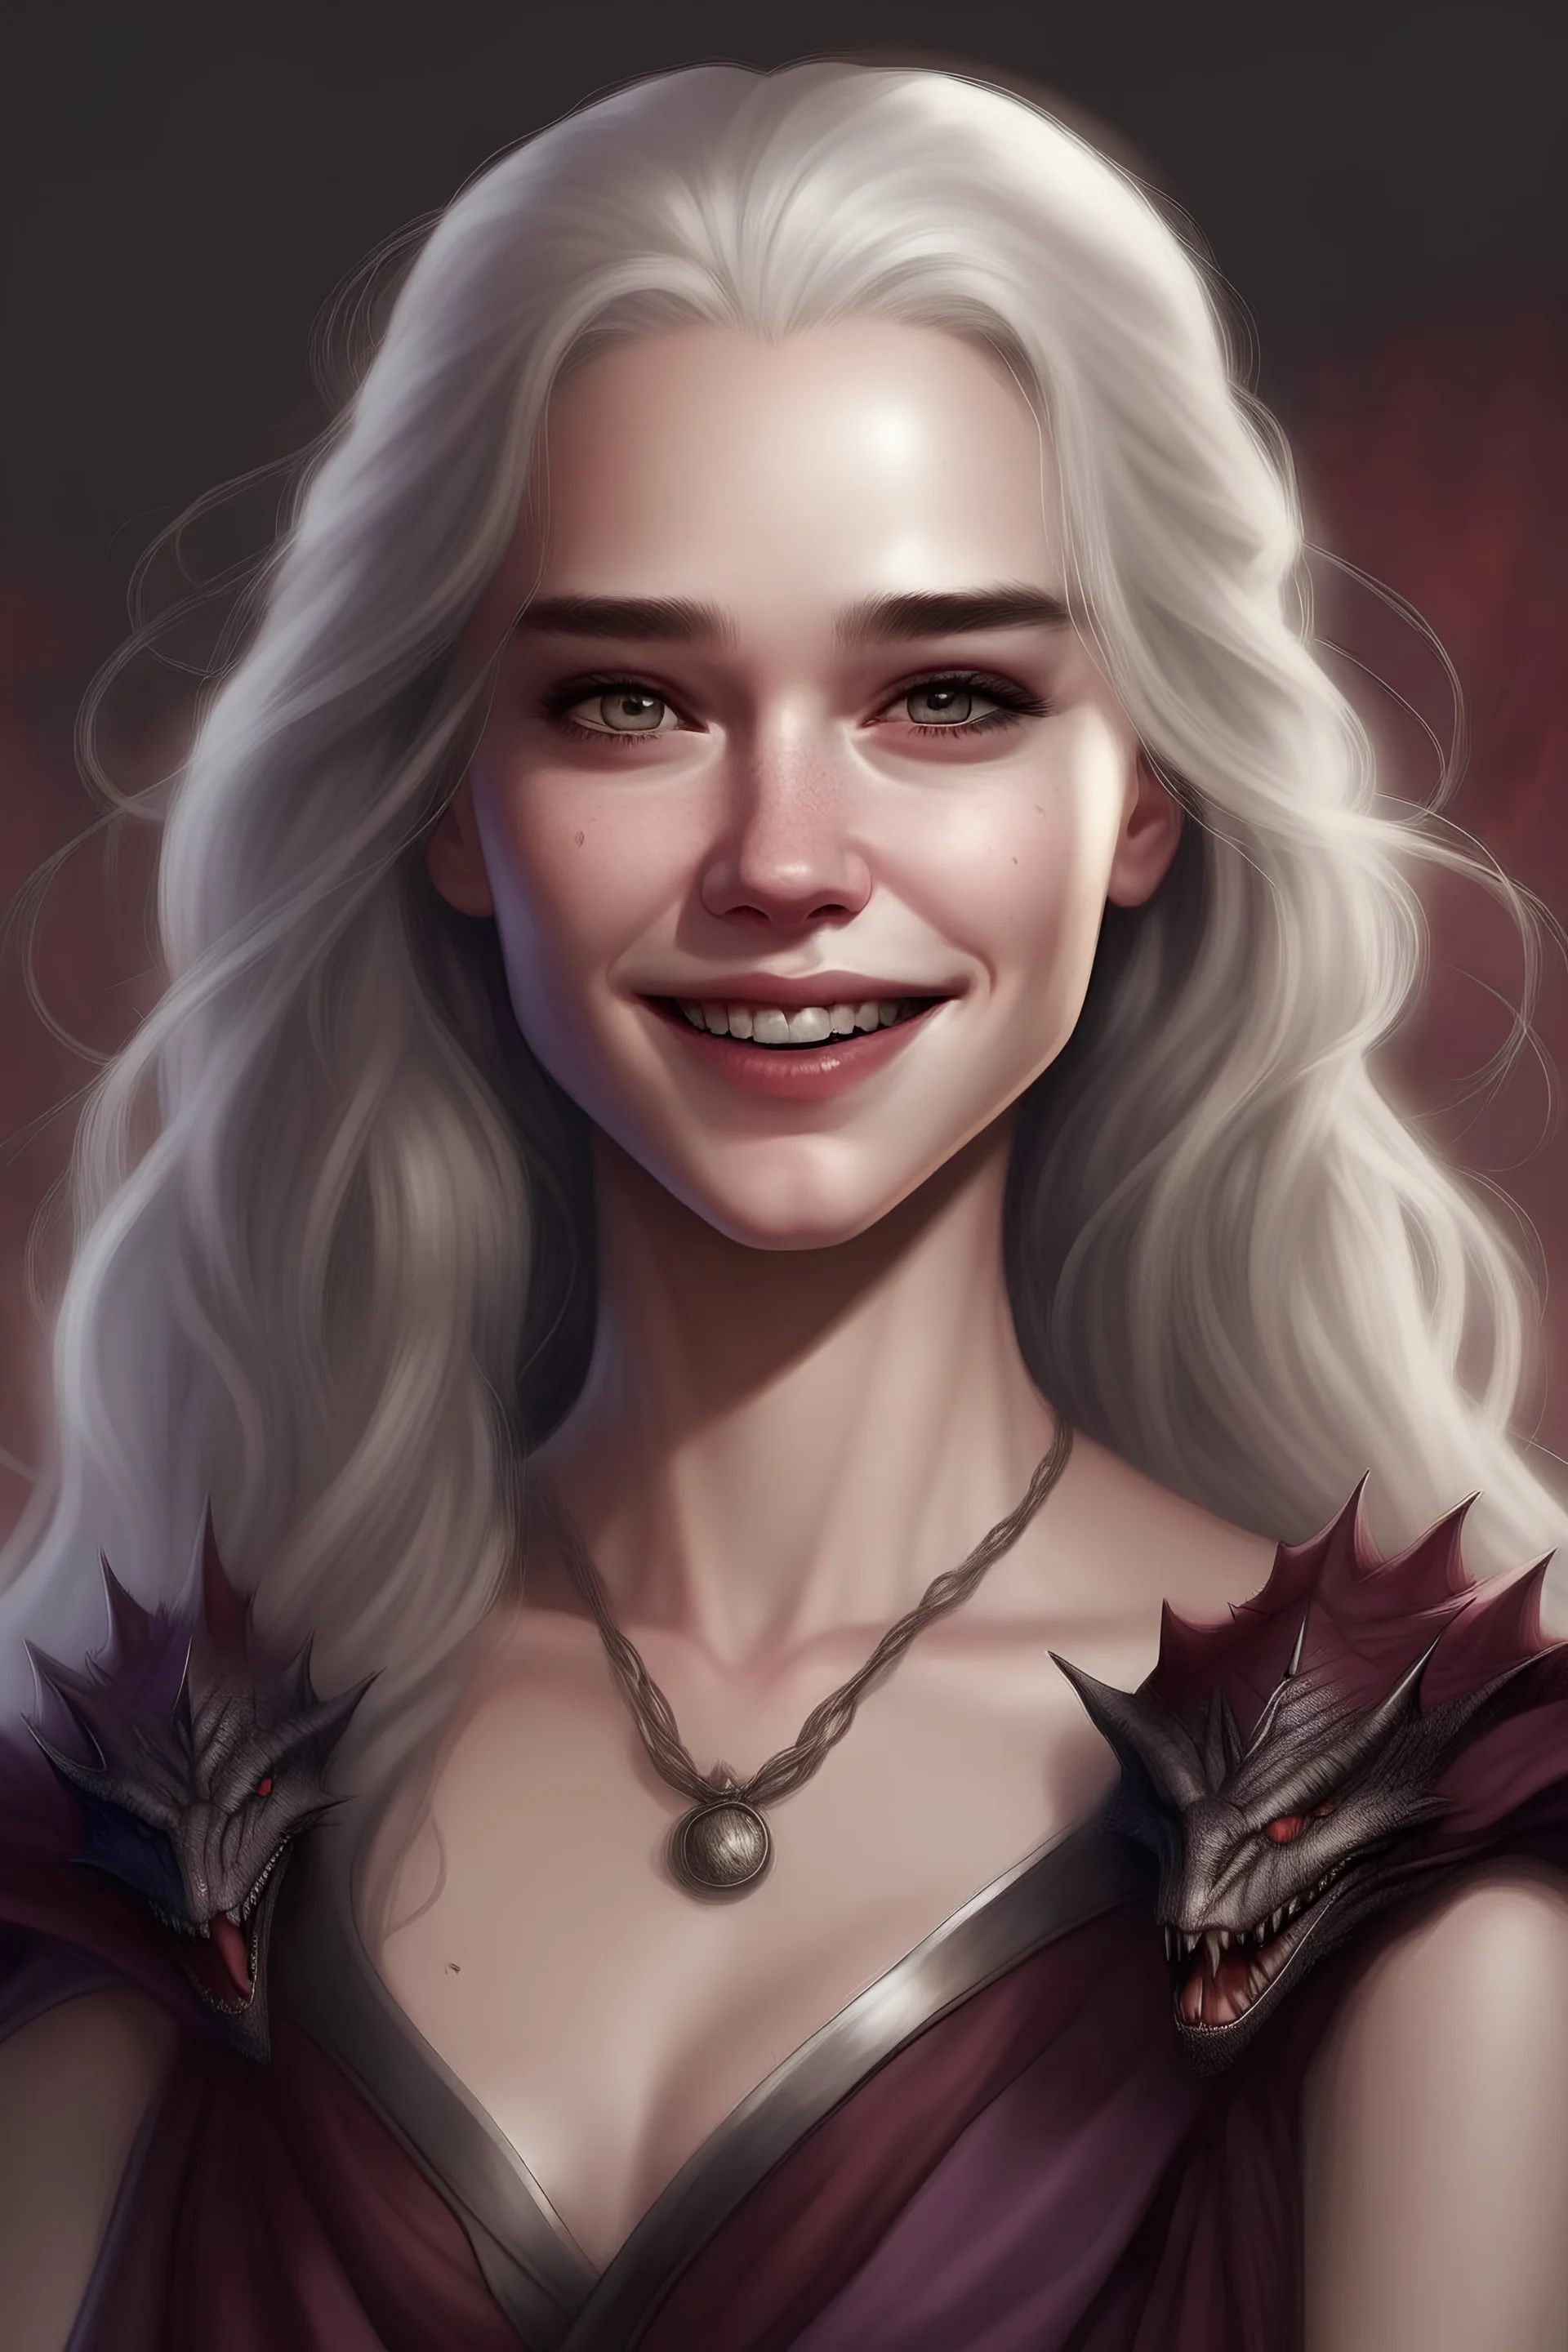 The 19-year-old Targaryen epitomizes Targaryen charm with her silver hair and lavender eyes. She has voluptuous breasts. She smiles straight ahead.